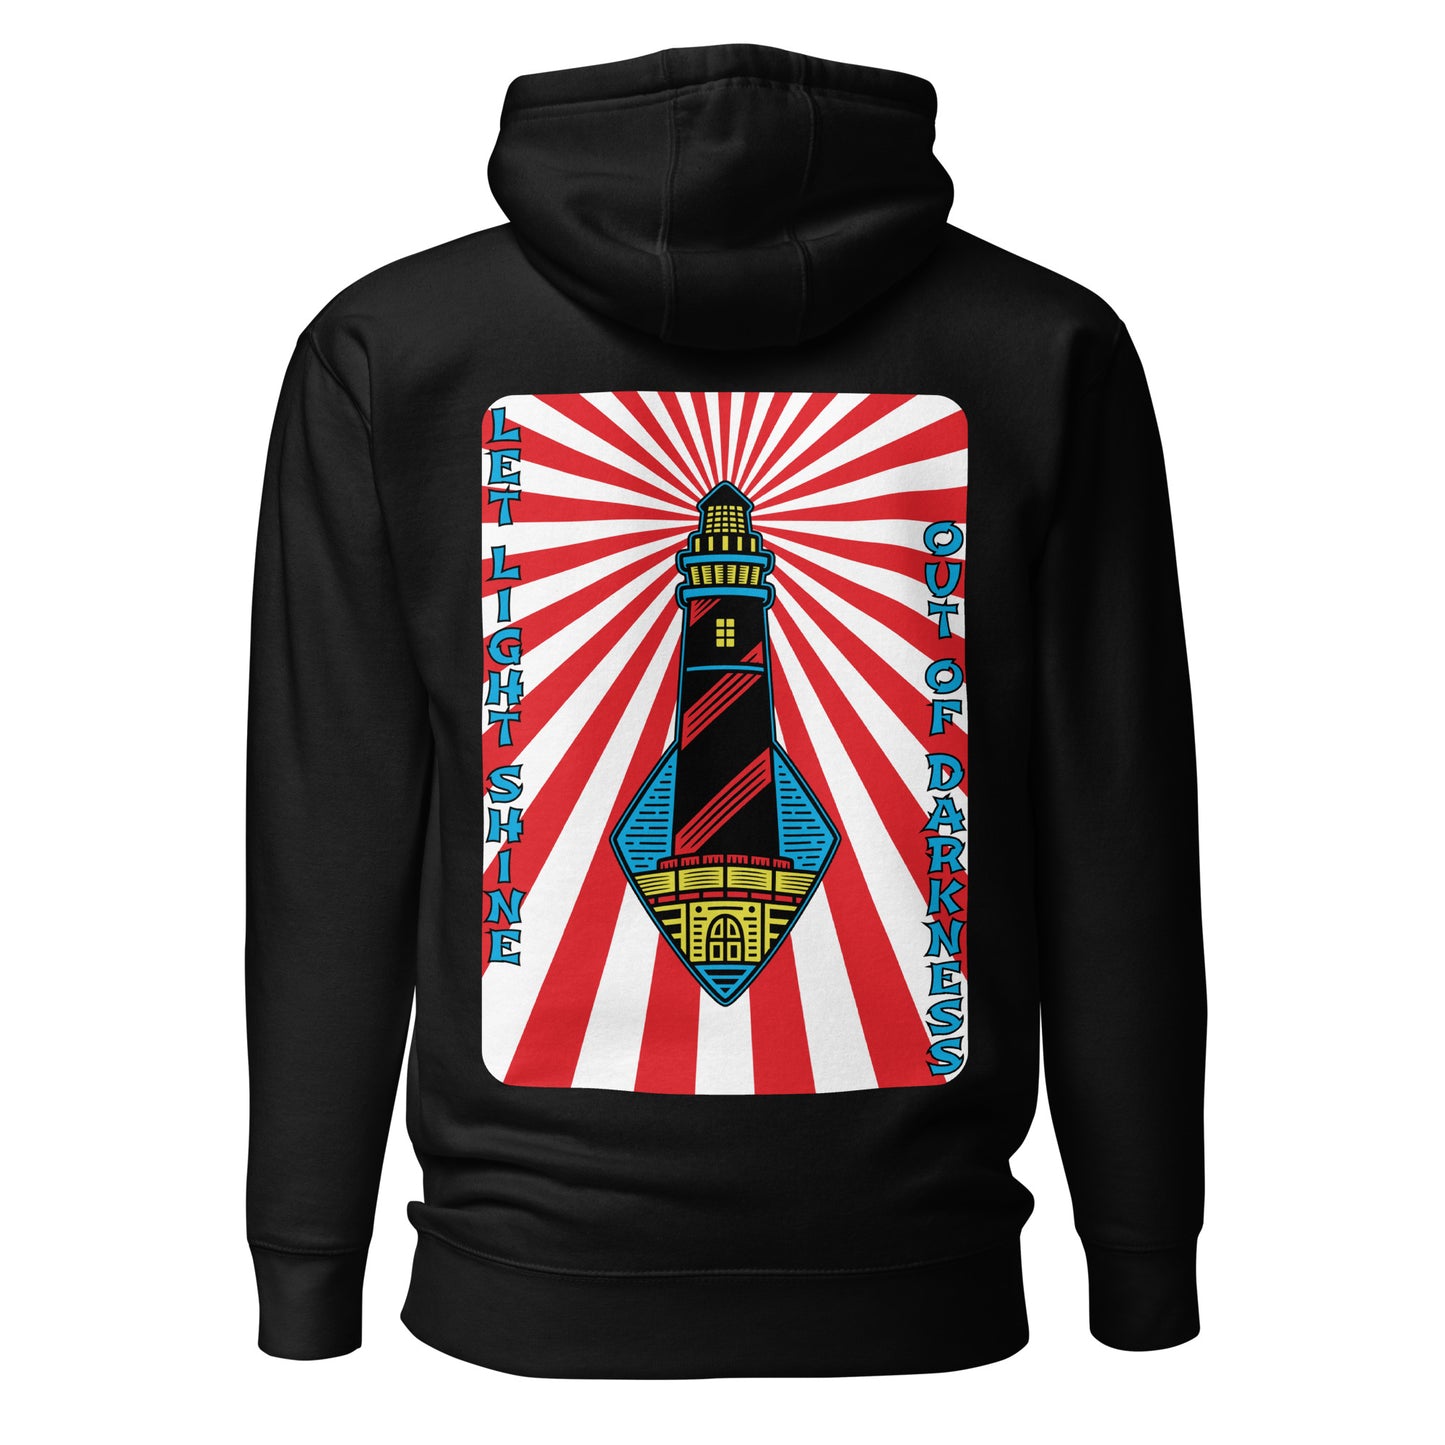 Let Light Shine Hoodie - For Your Courage